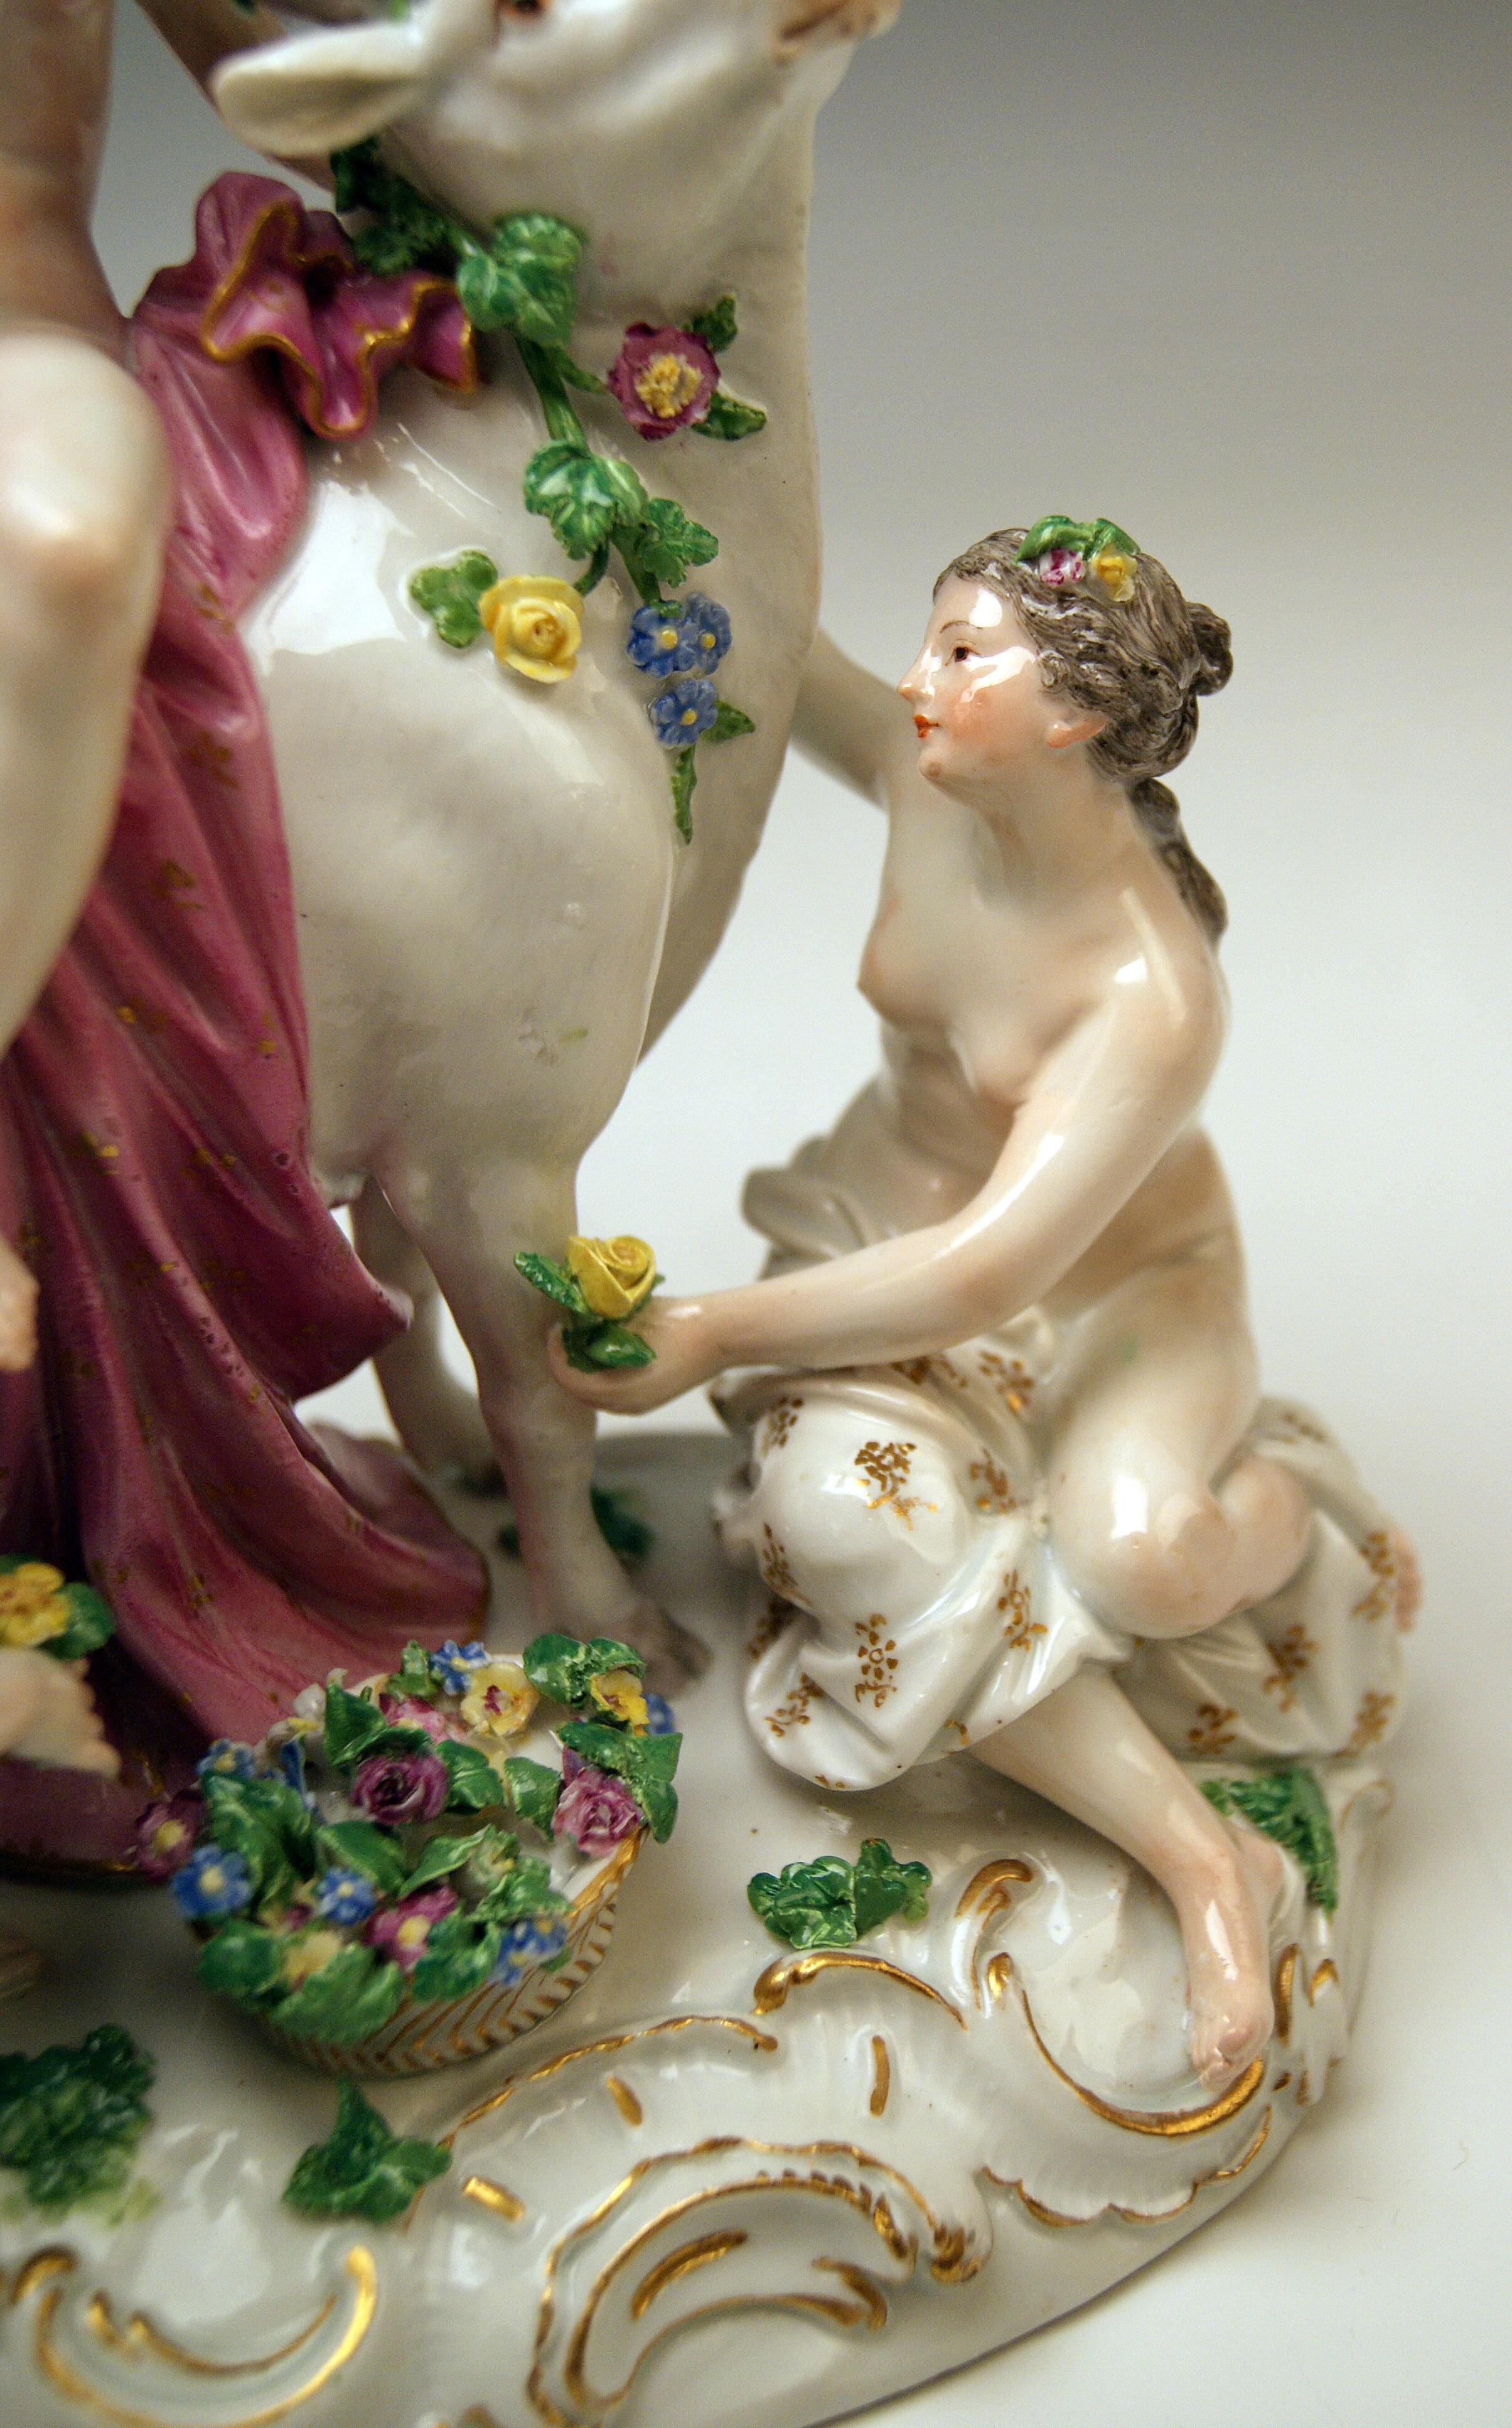 Mid-18th Century Meissen Figurines The Rape of Europe Model 2697 by Eberlein Made c. 1750 Rococo